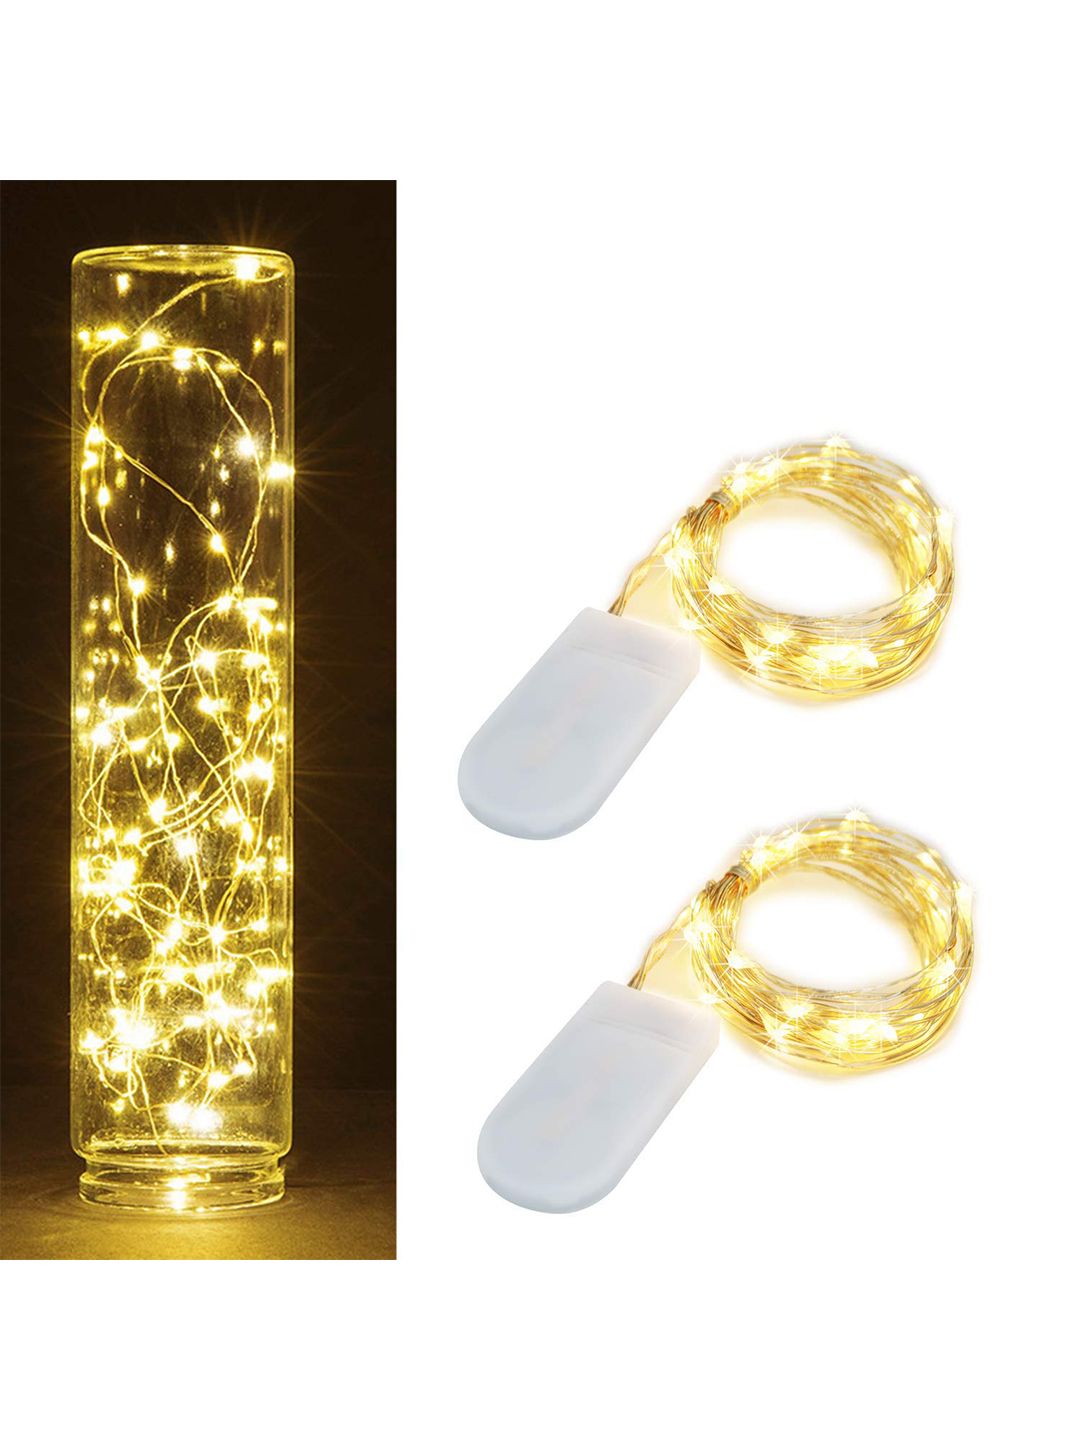 XERGY Set of 2 Golden-Toned 20 LED Battery Powered Fairy Lights Price in India